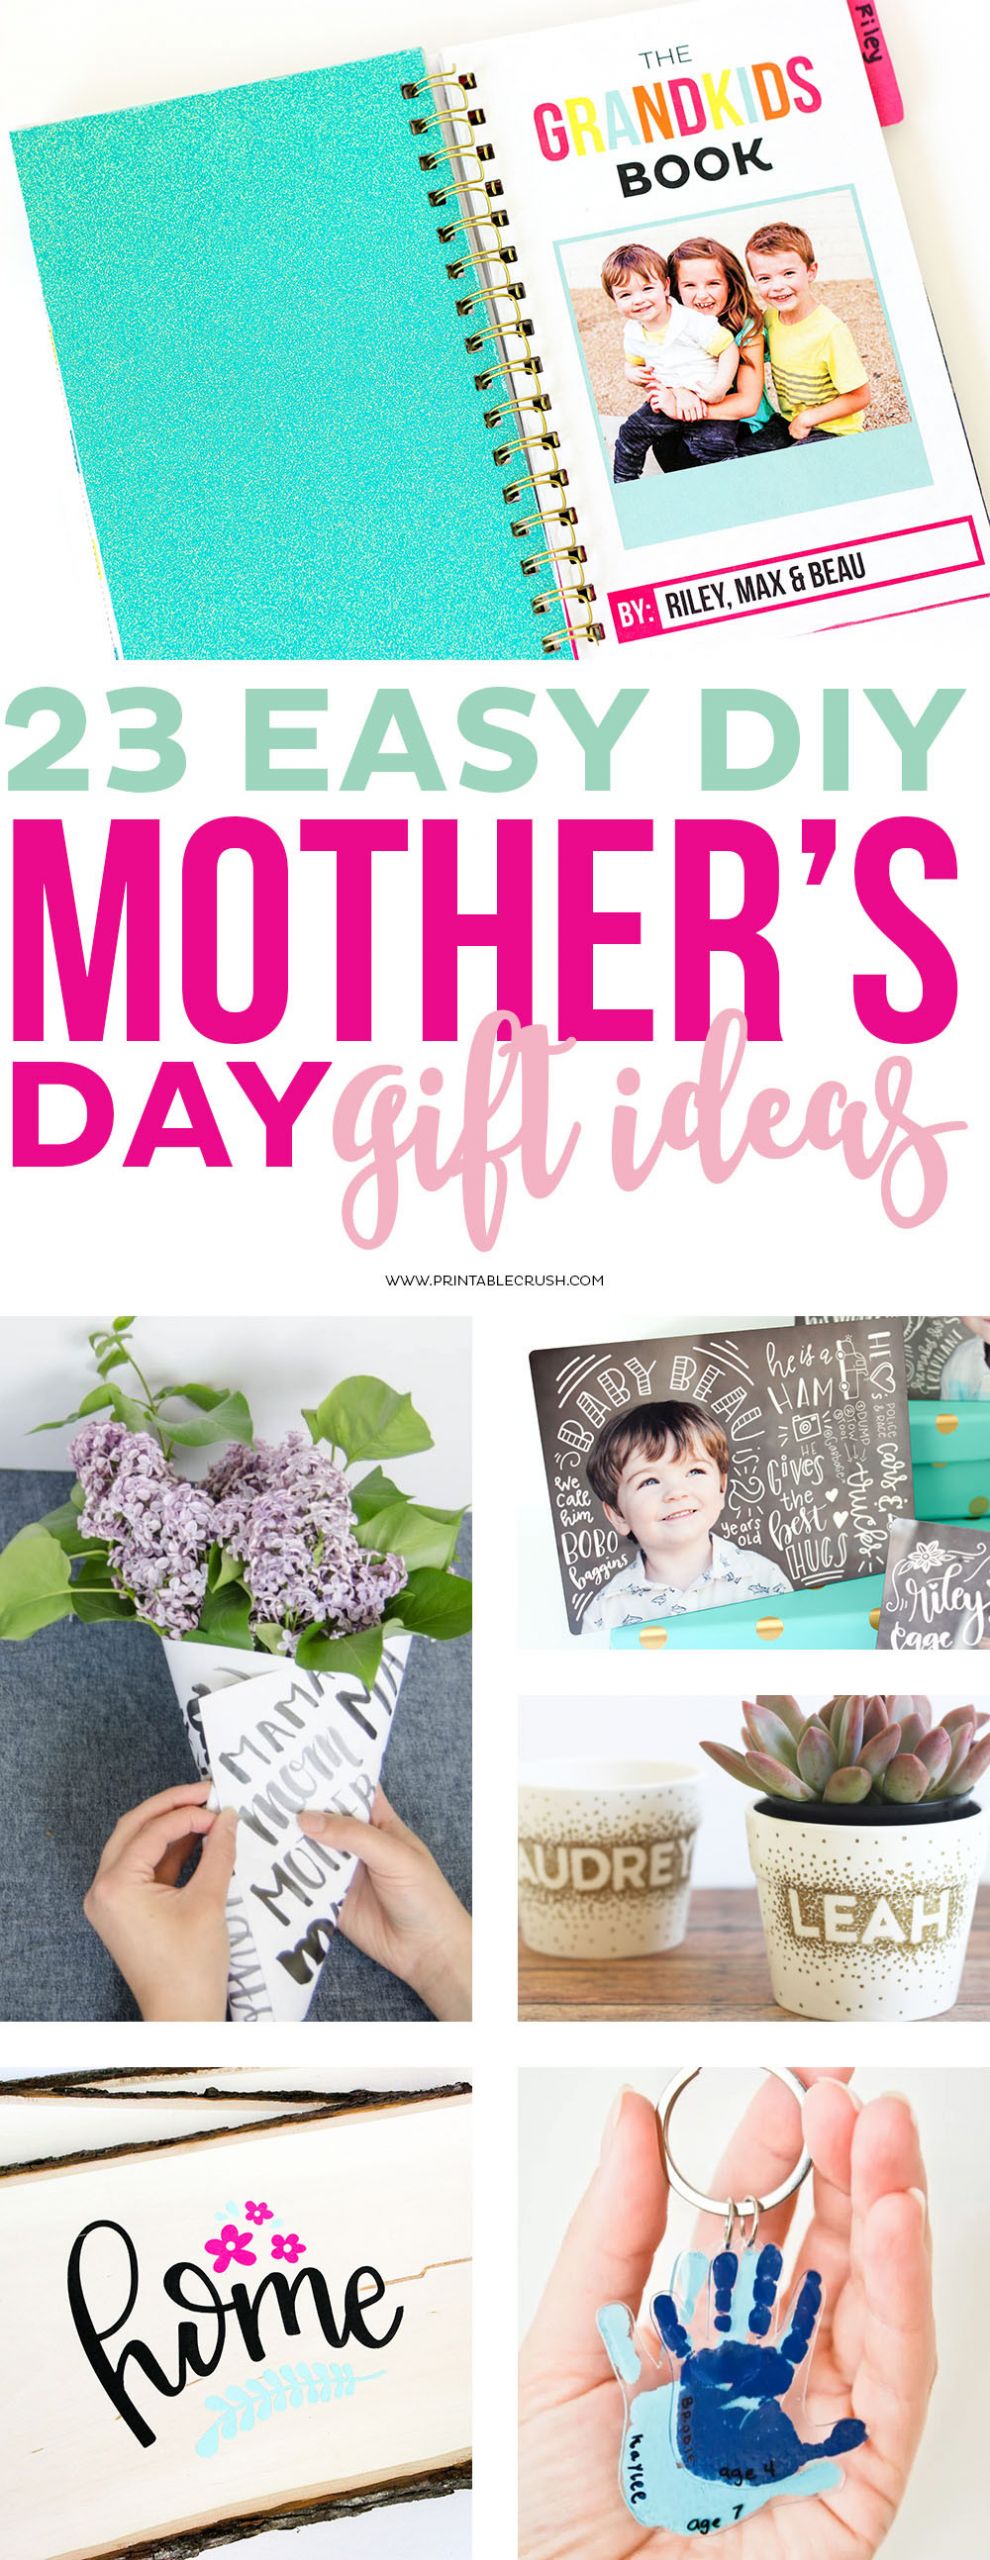 DIY Mothers Day Gifts Easy
 23 Easy DIY Mother s Day Gift Ideas Printable Crush